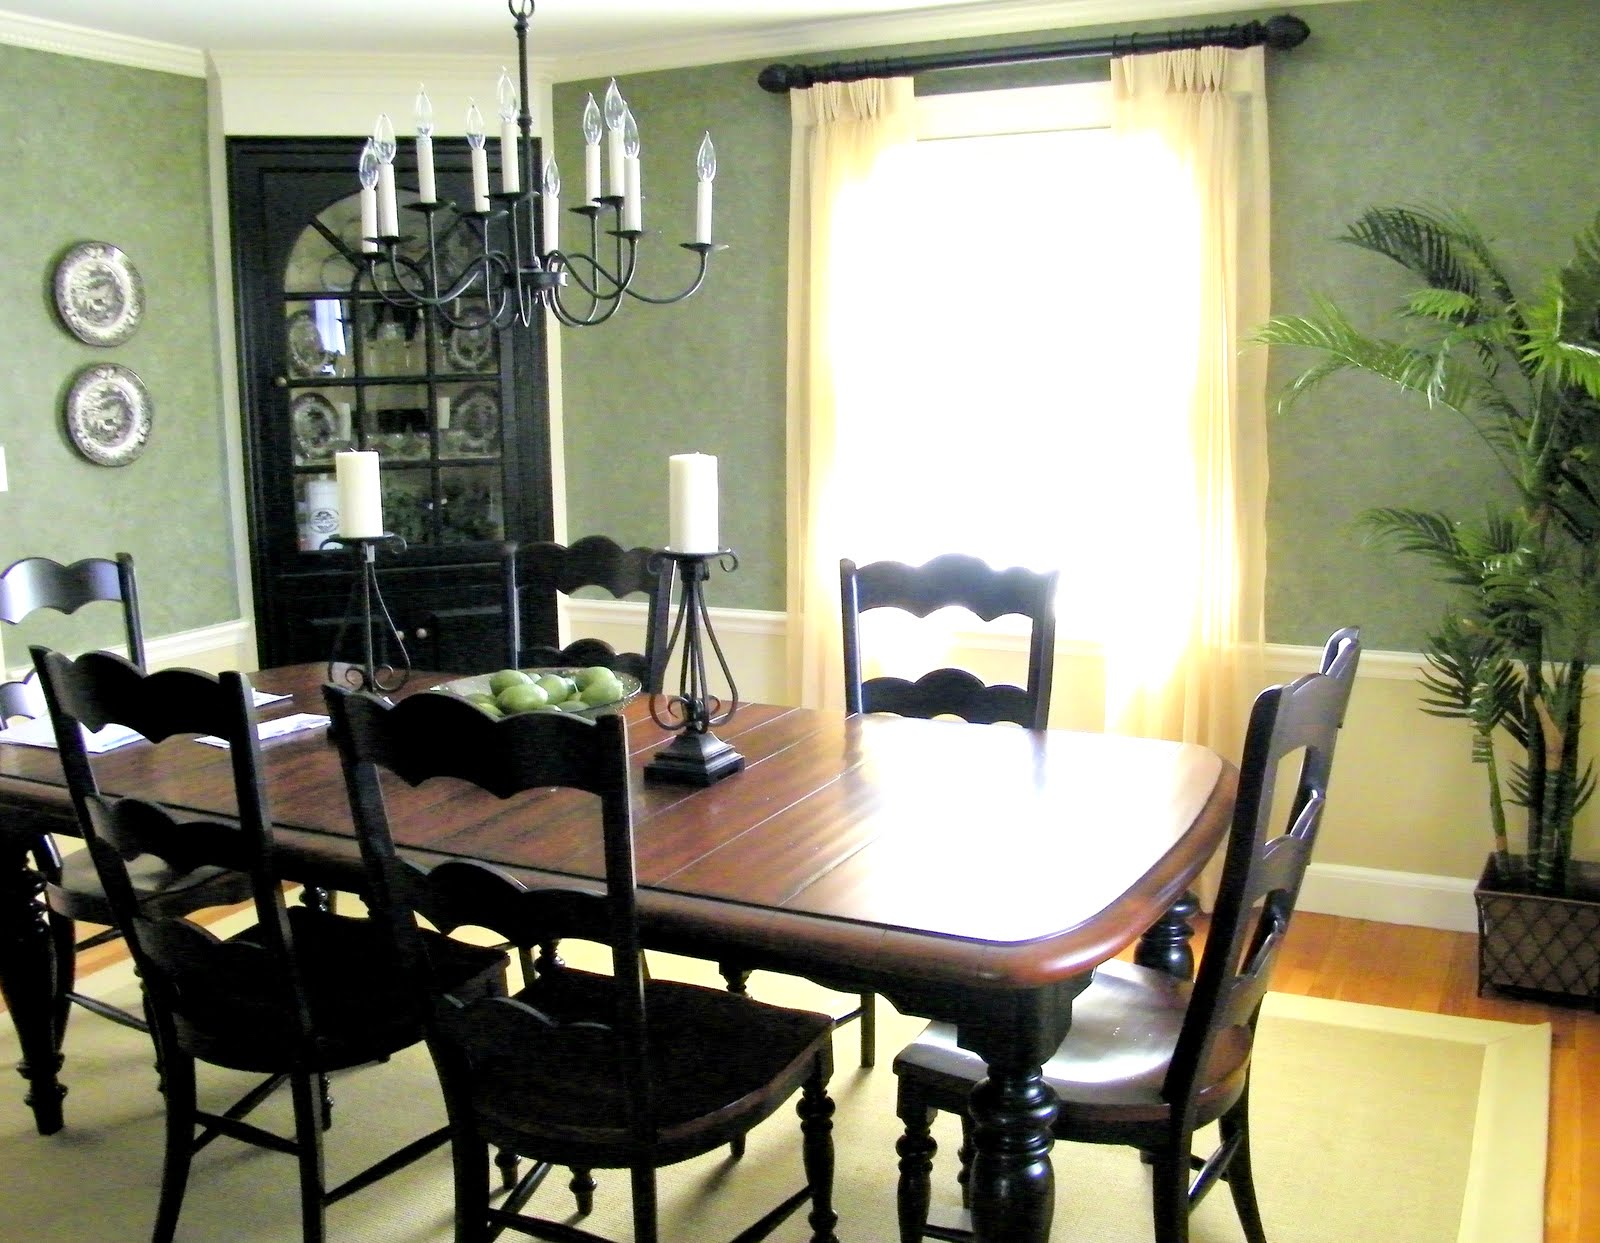 Maison Decor Black Paint Updates A Traditional Dining Room